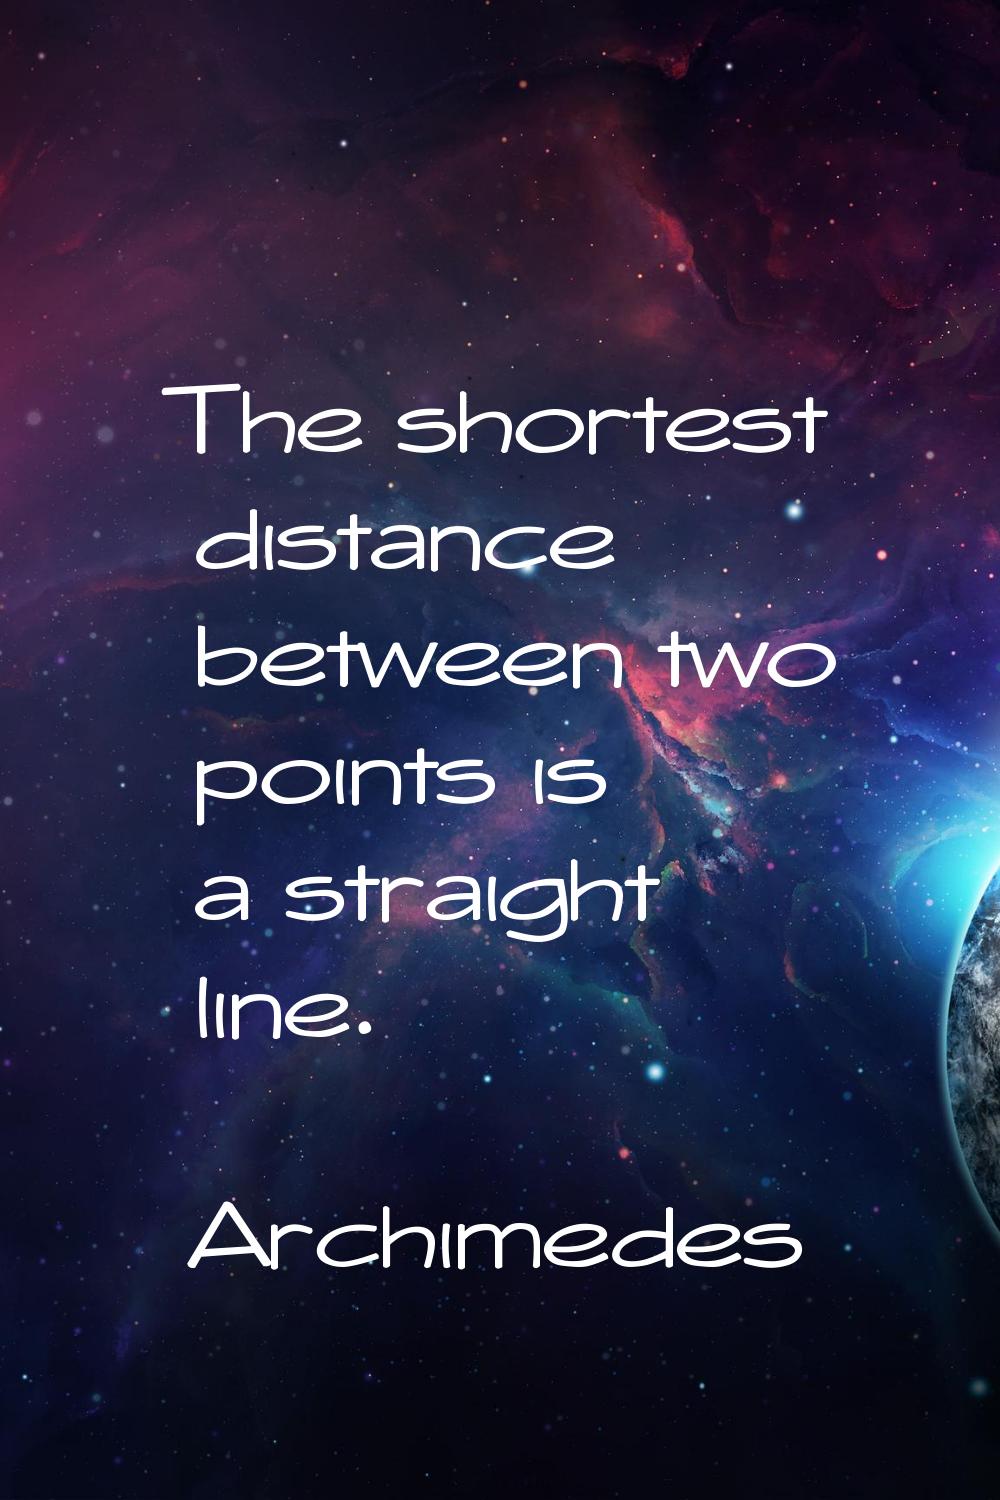 The shortest distance between two points is a straight line.